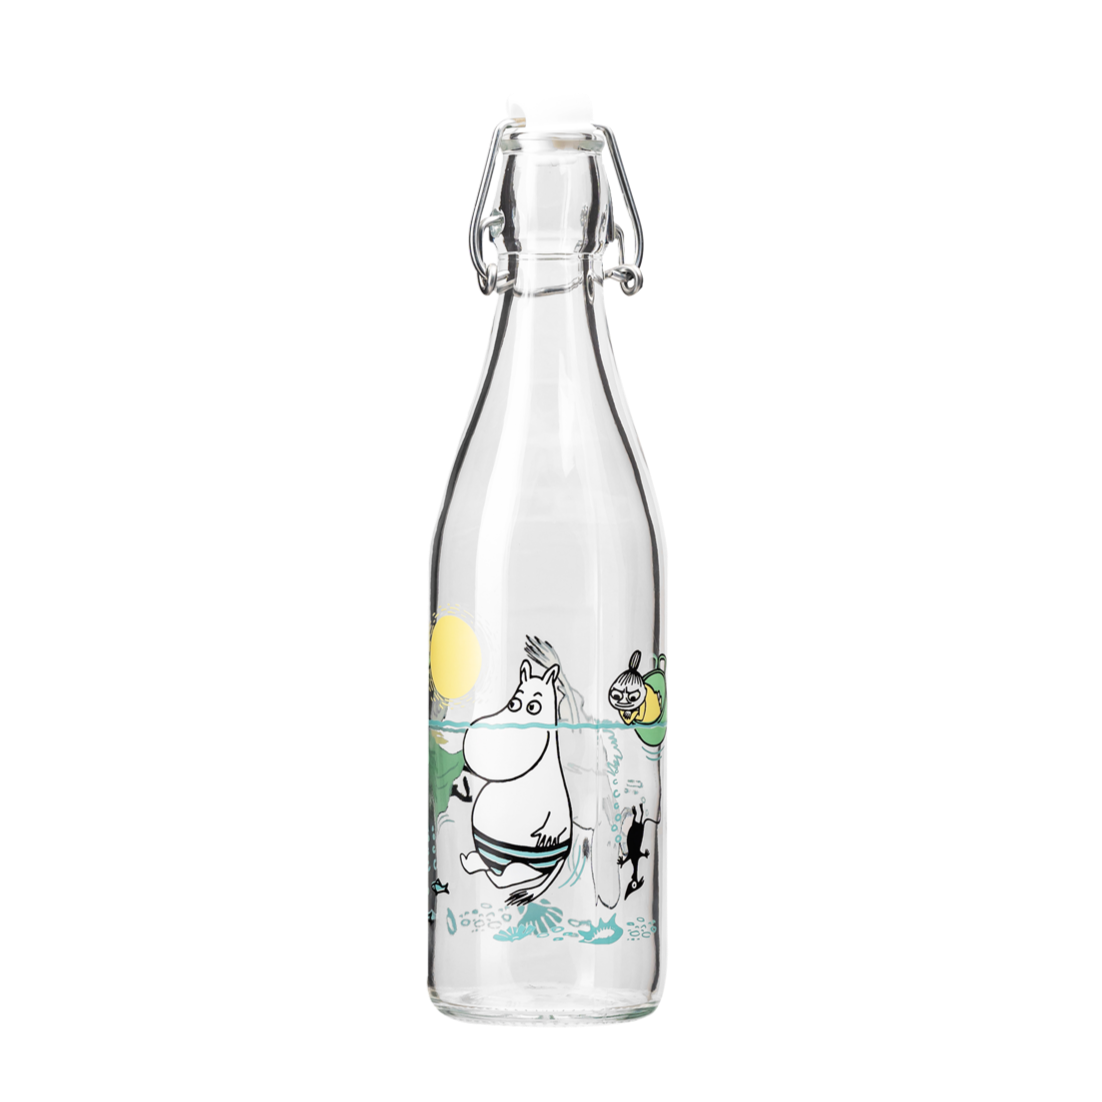 Muurla Moomin Fun In The Water Glass Bottle, with clamp stopper. 774-050-07